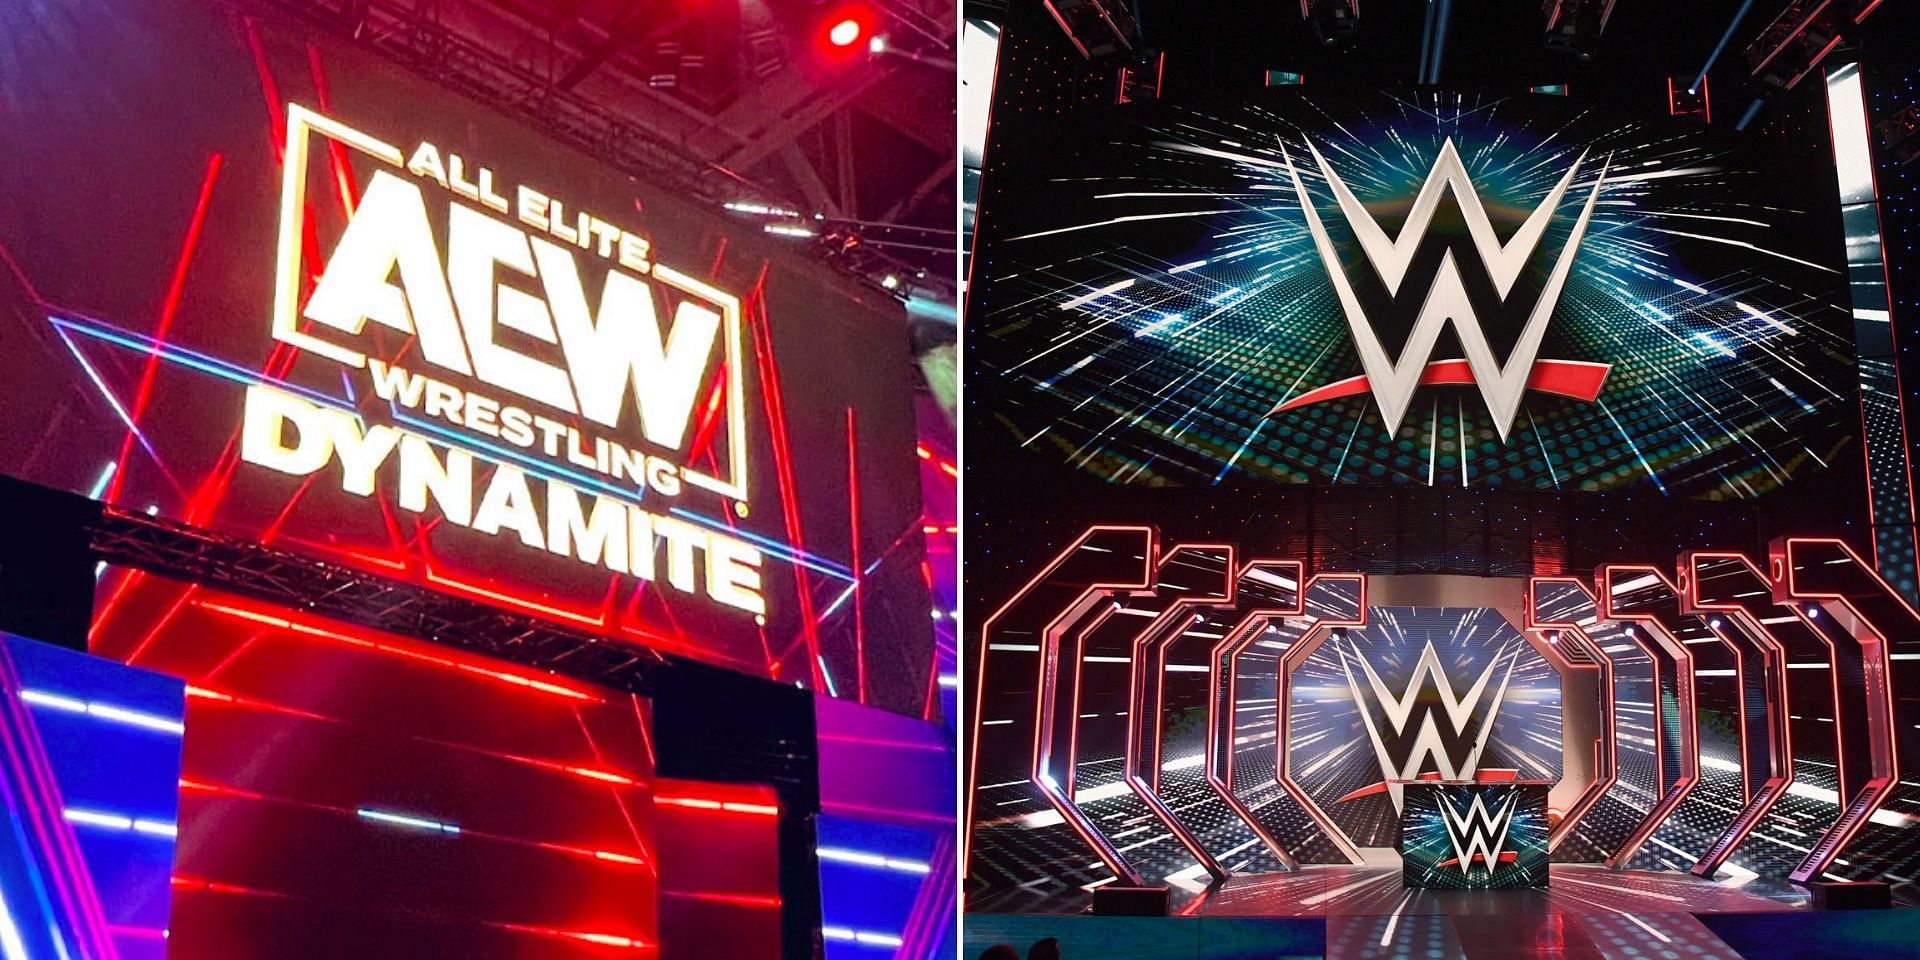 A former AEW star lost on a WWE show